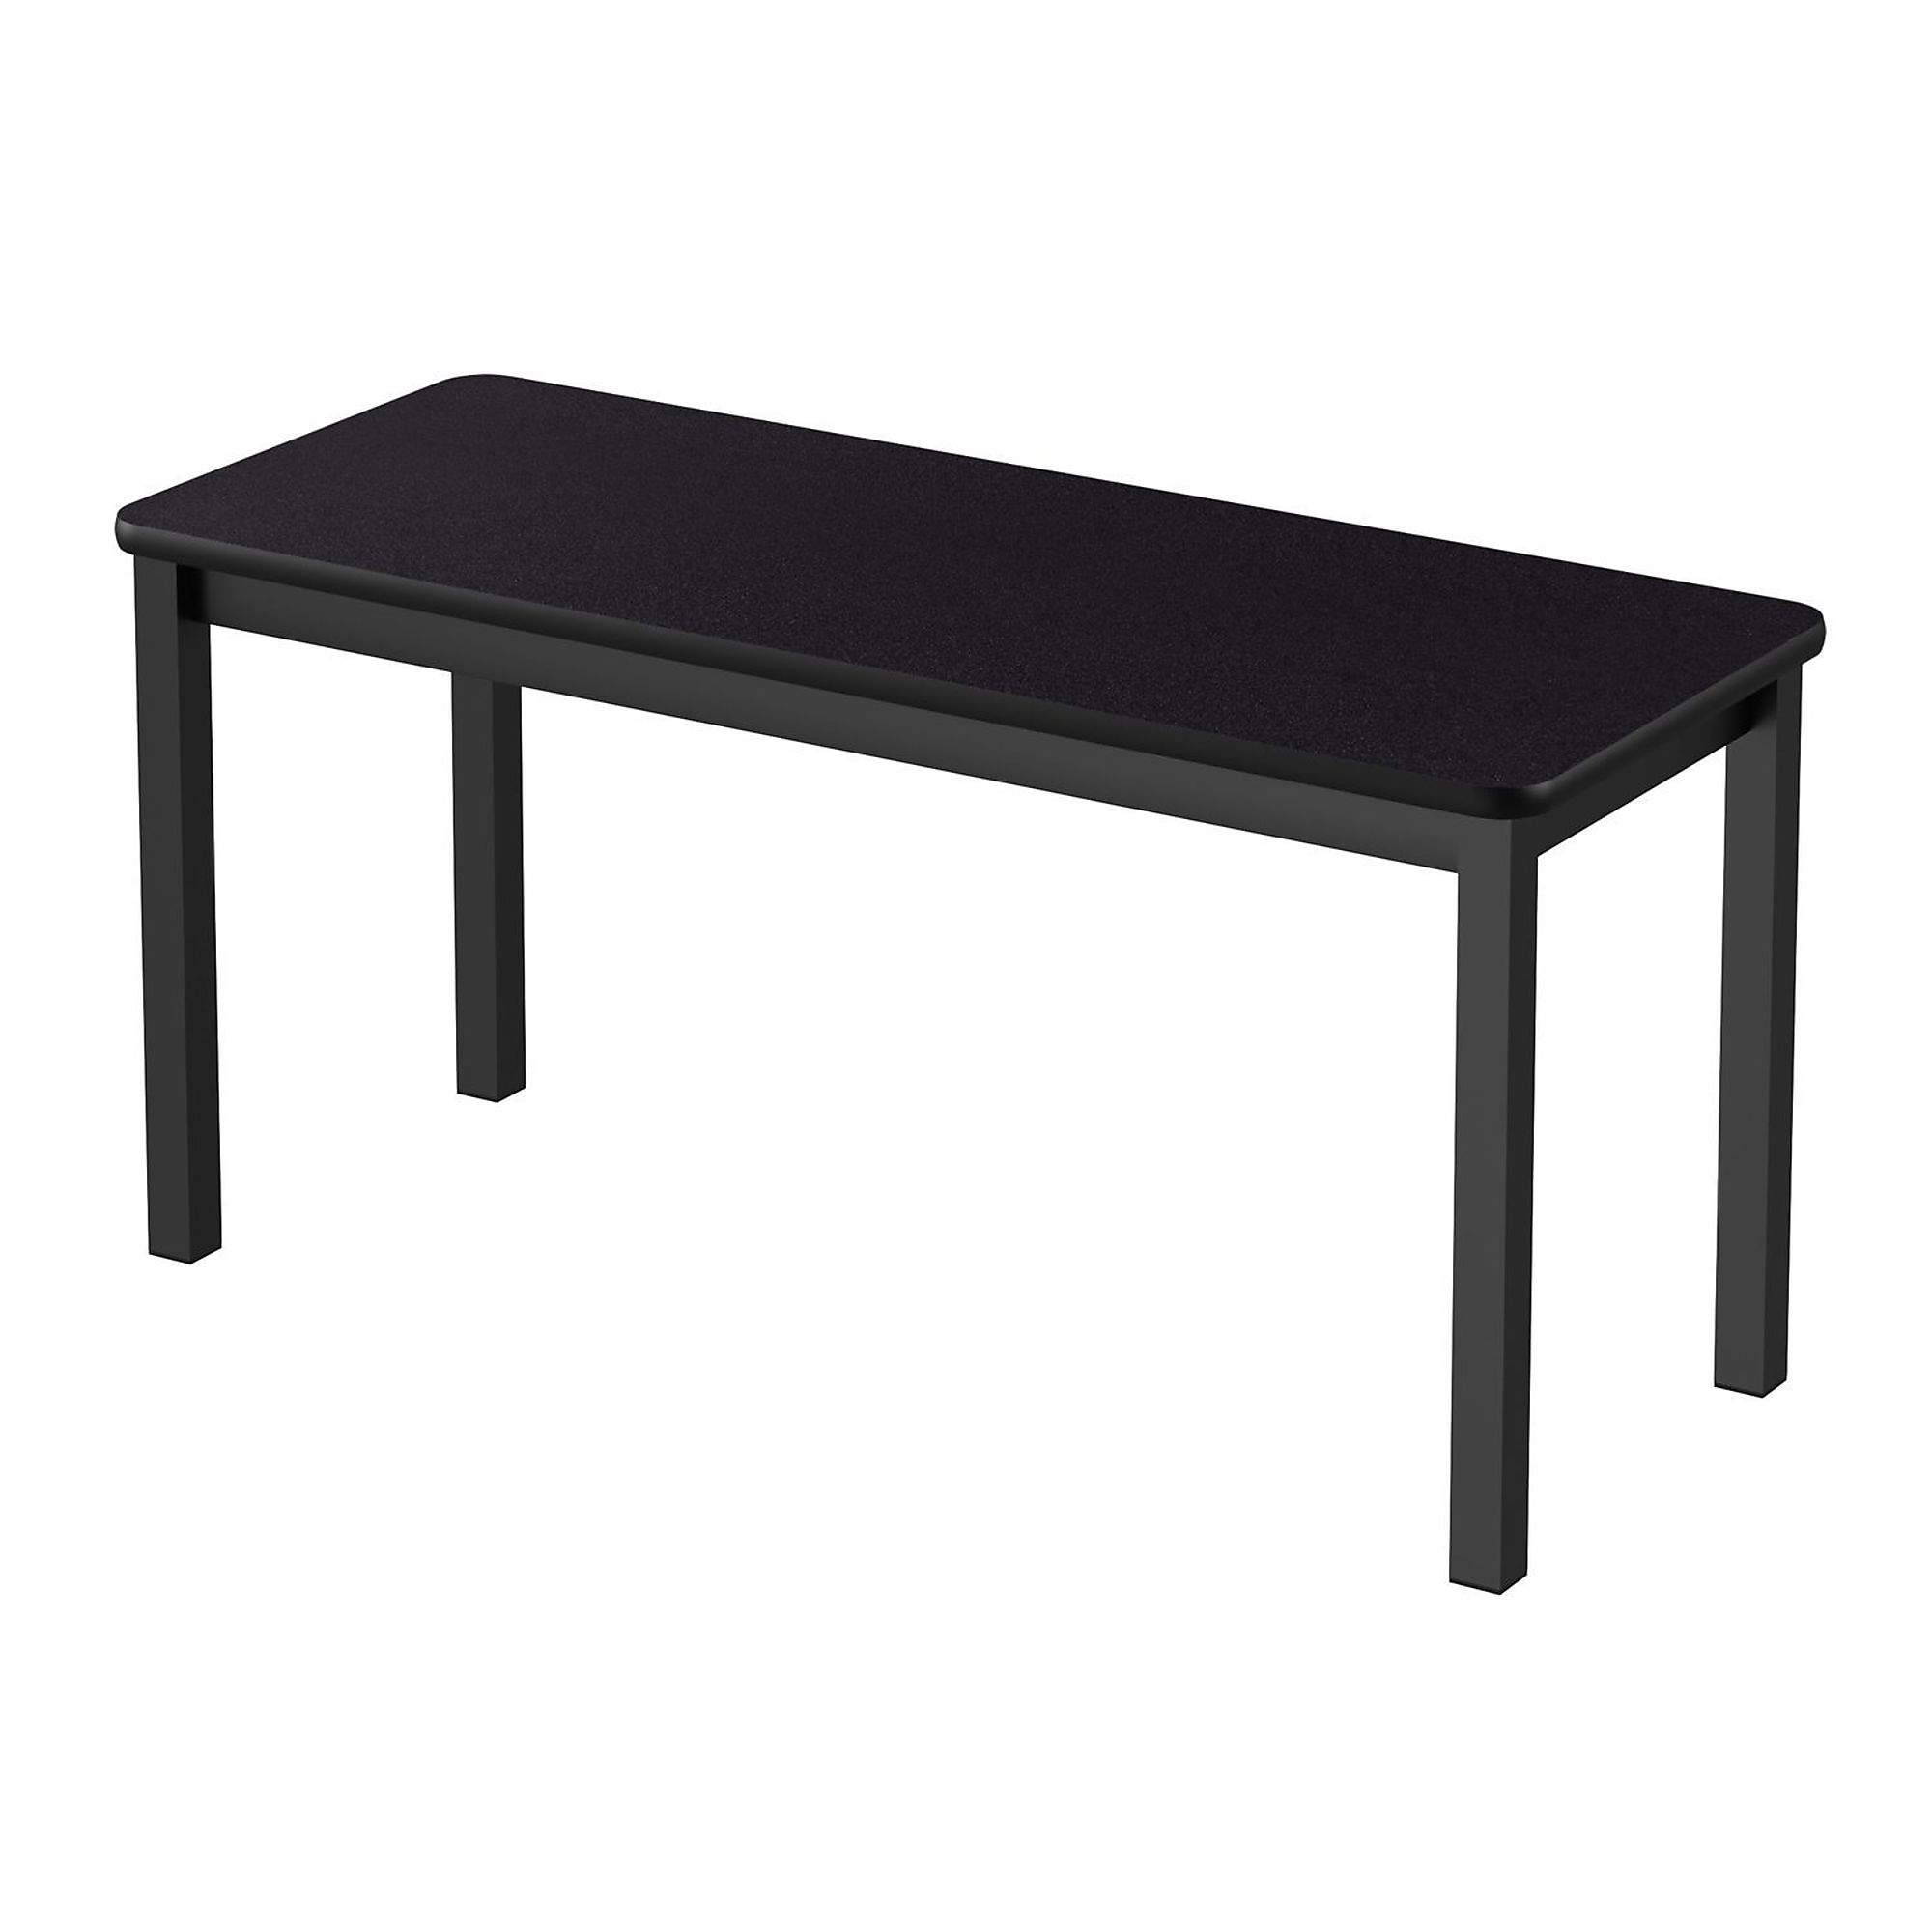 Correll, TFL Library Table, Black Granite, 24x72, Height 29 in, Width 24 in, Length 72 in, Model LR2472TF-07